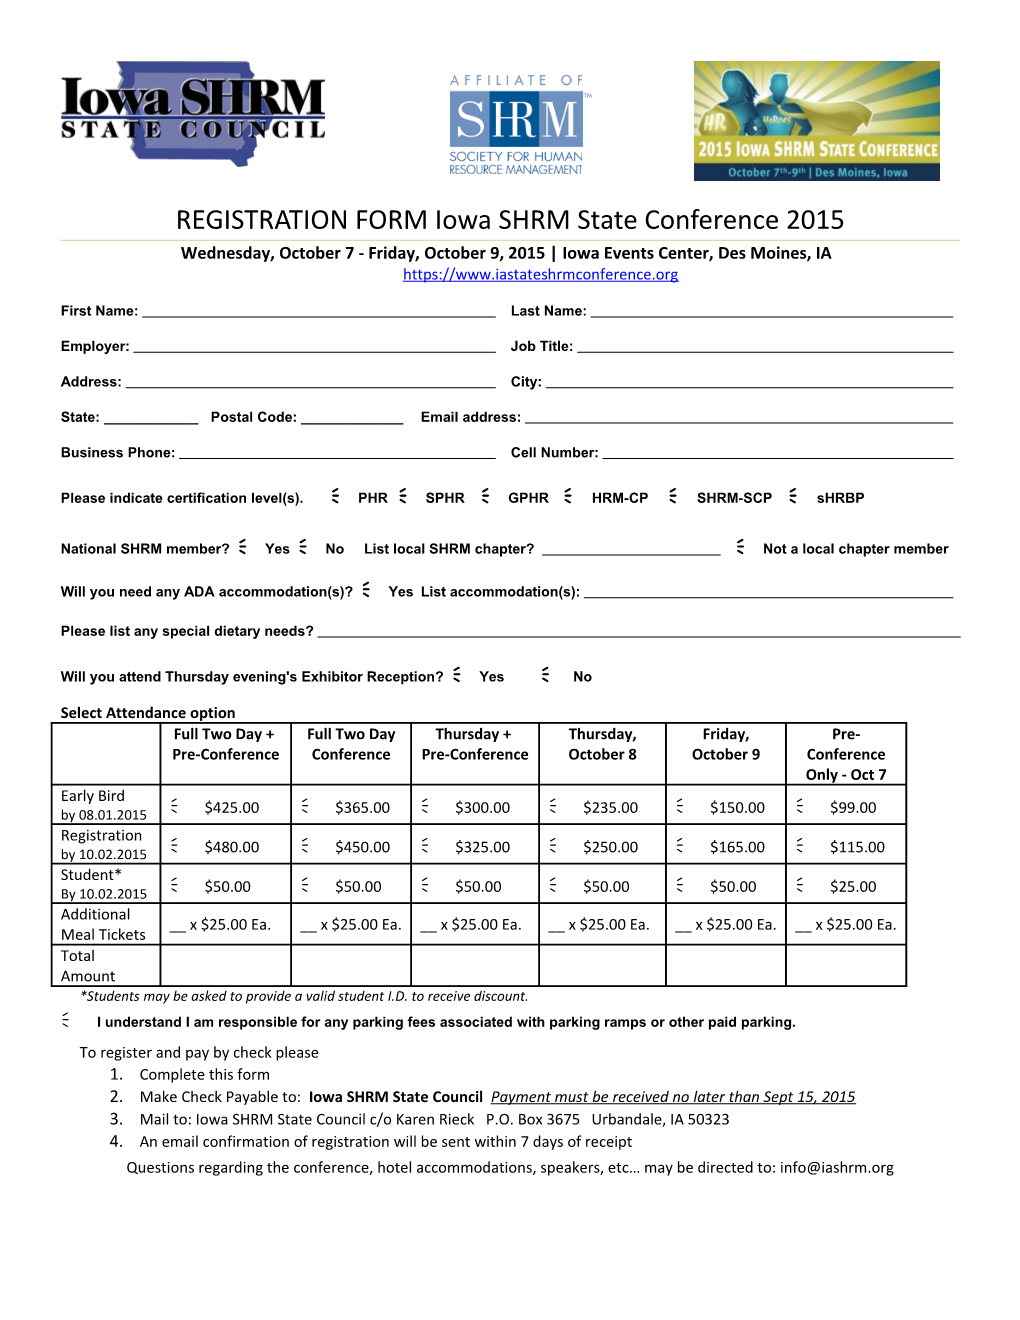 REGISTRATION FORM Iowa SHRM State Conference 2015